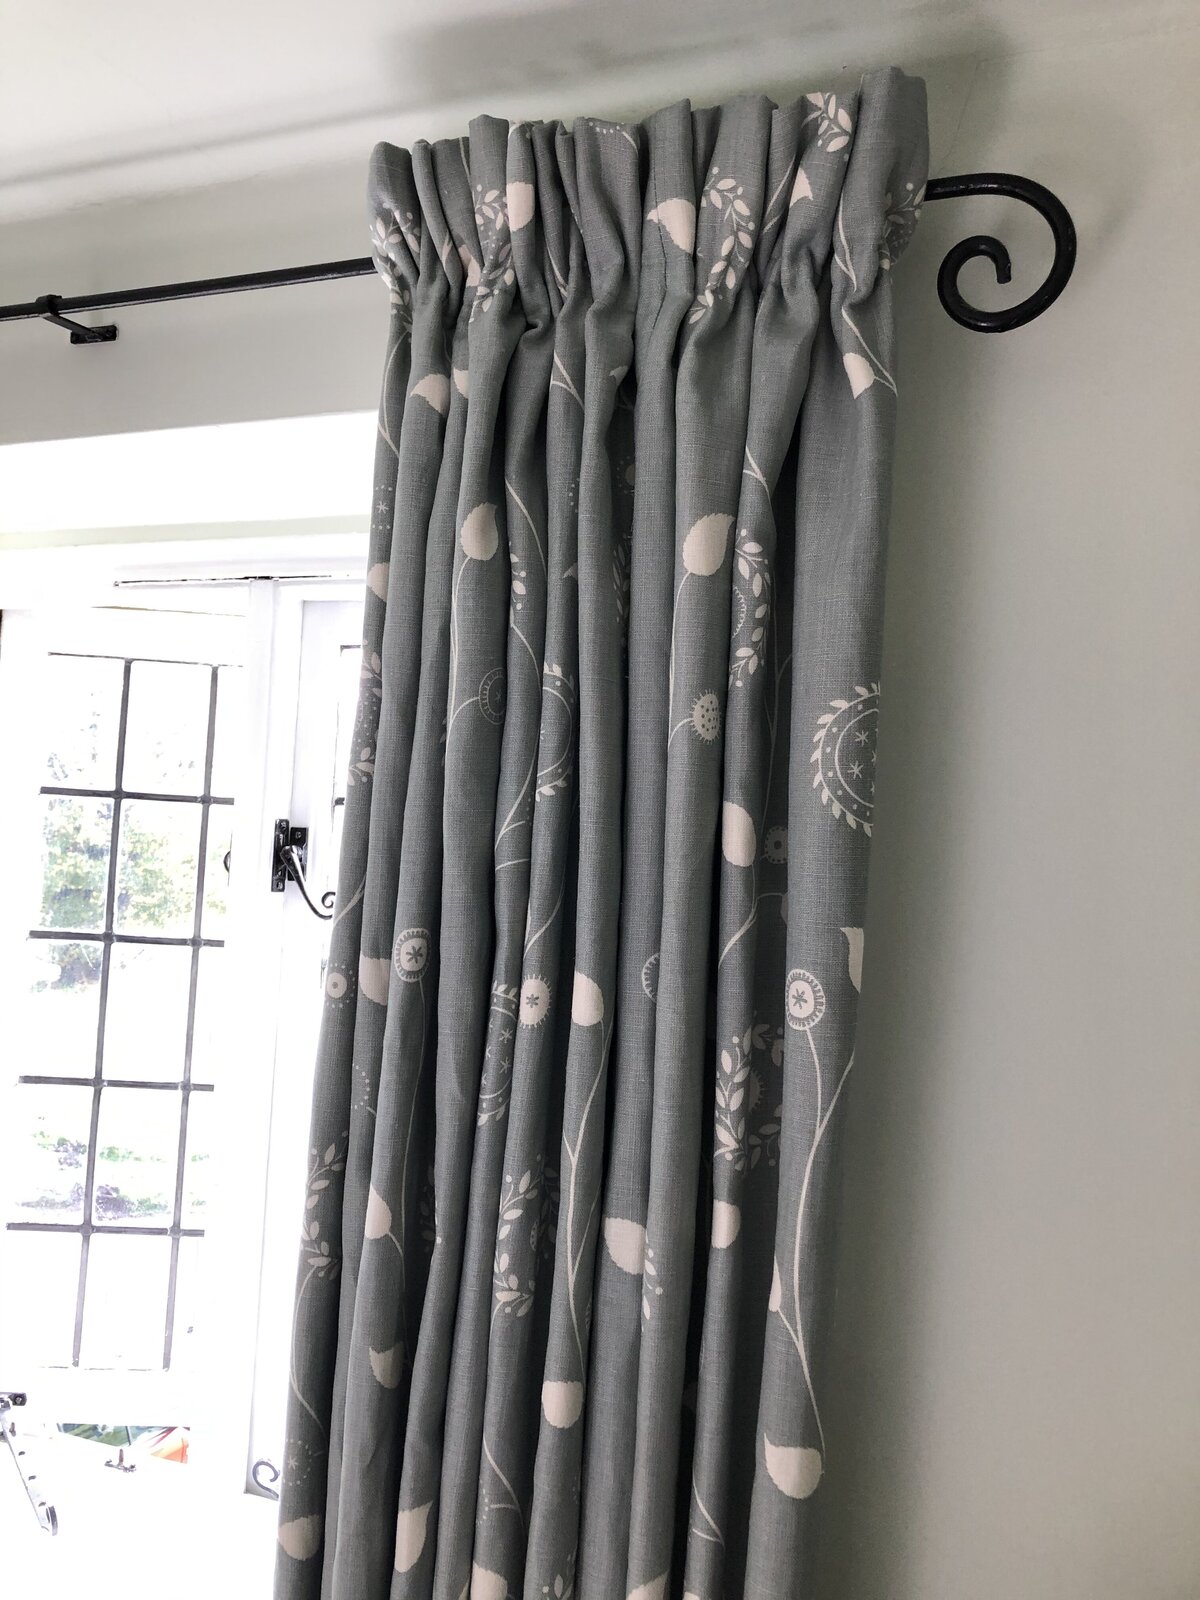 Made to measure curtains & blijds Oxfordshire28